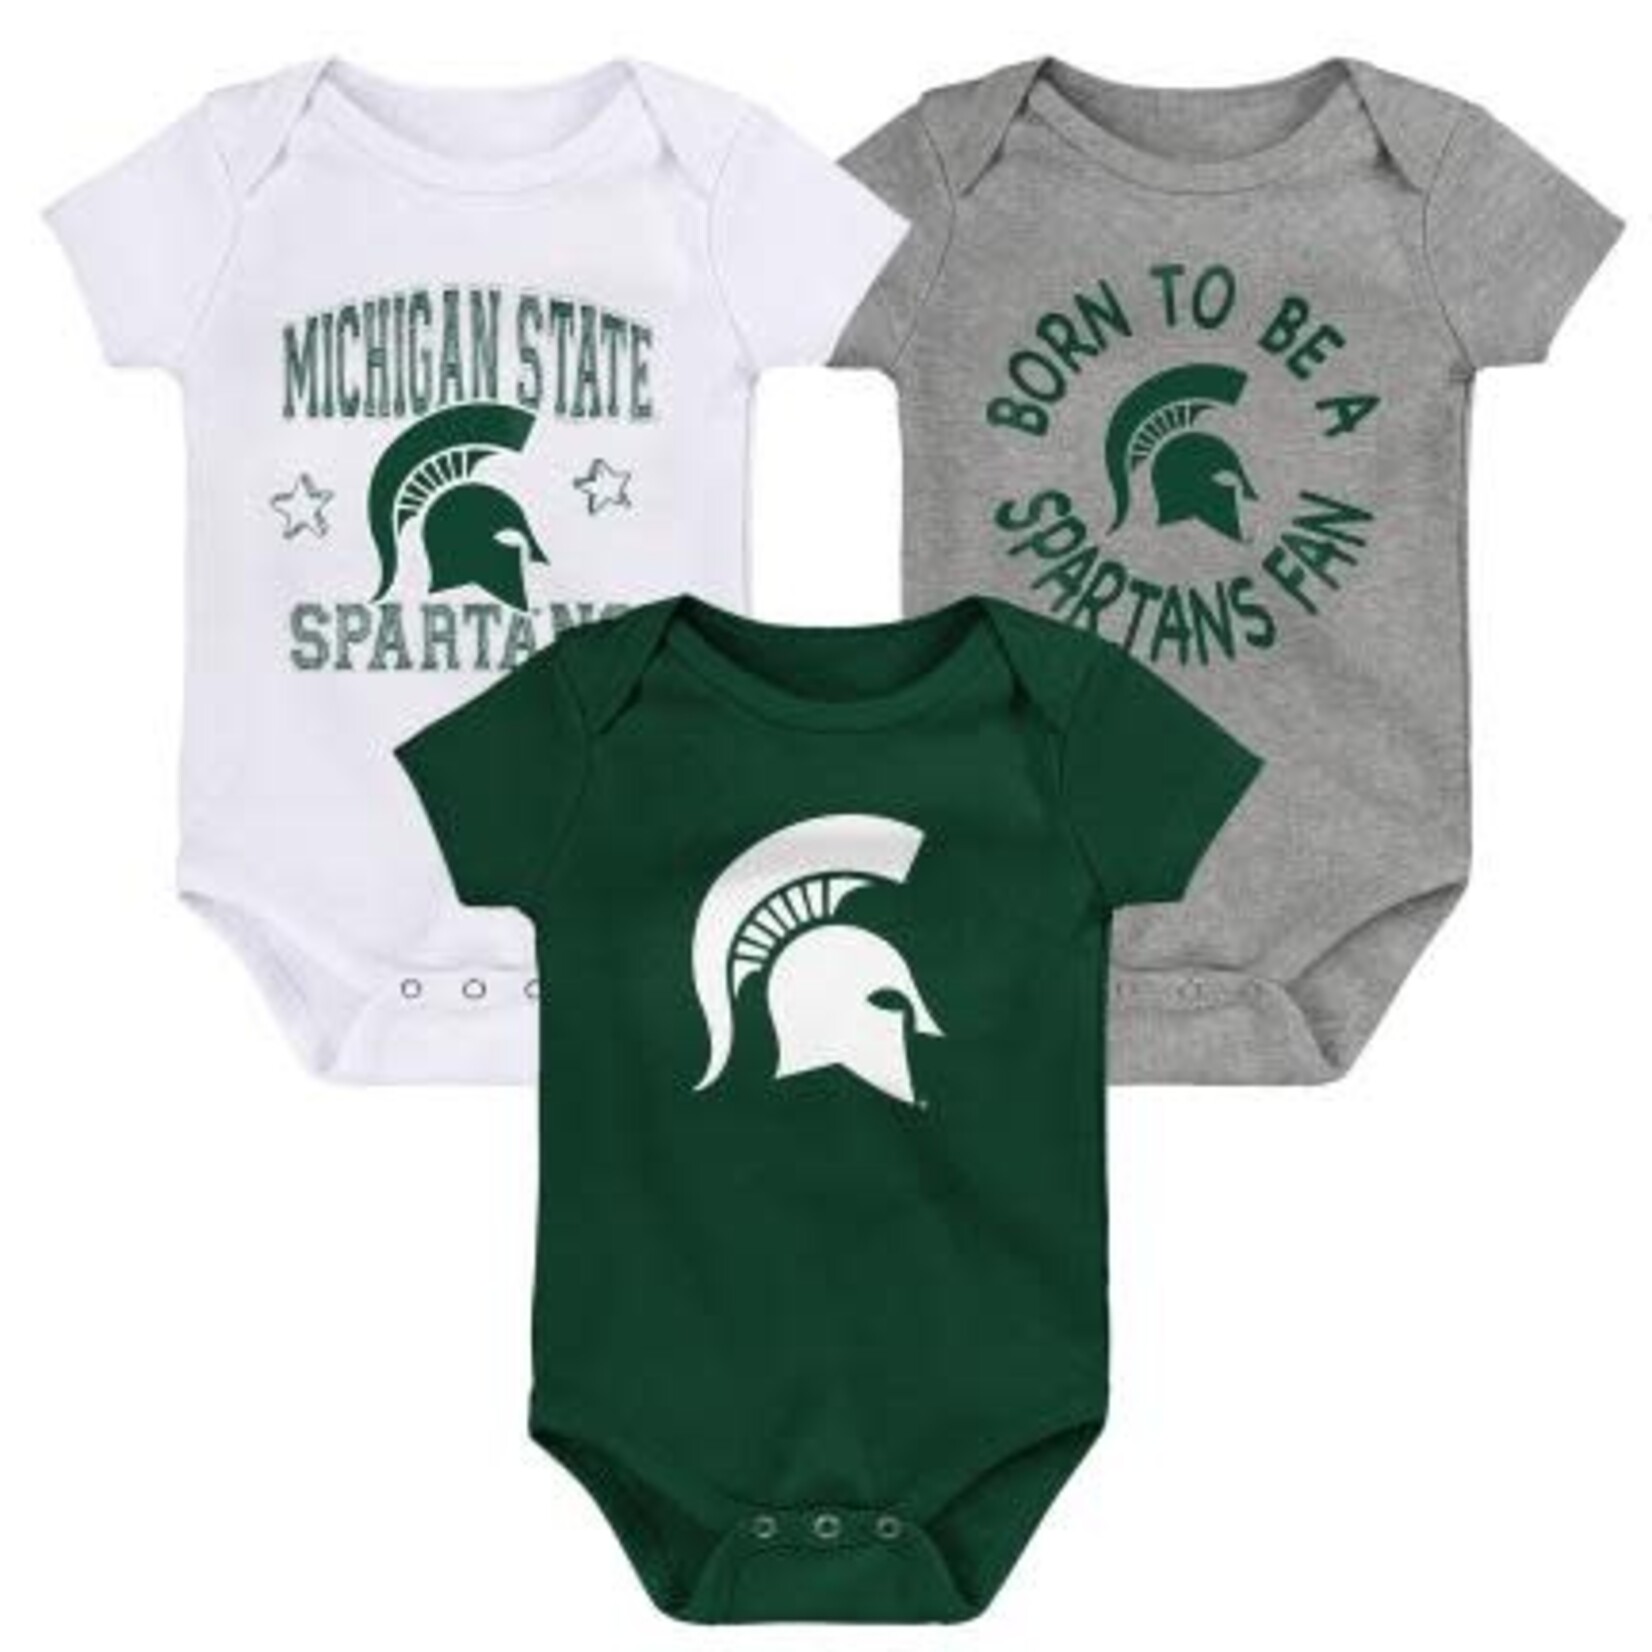 MSU Infant Born to Be creeper set of 3